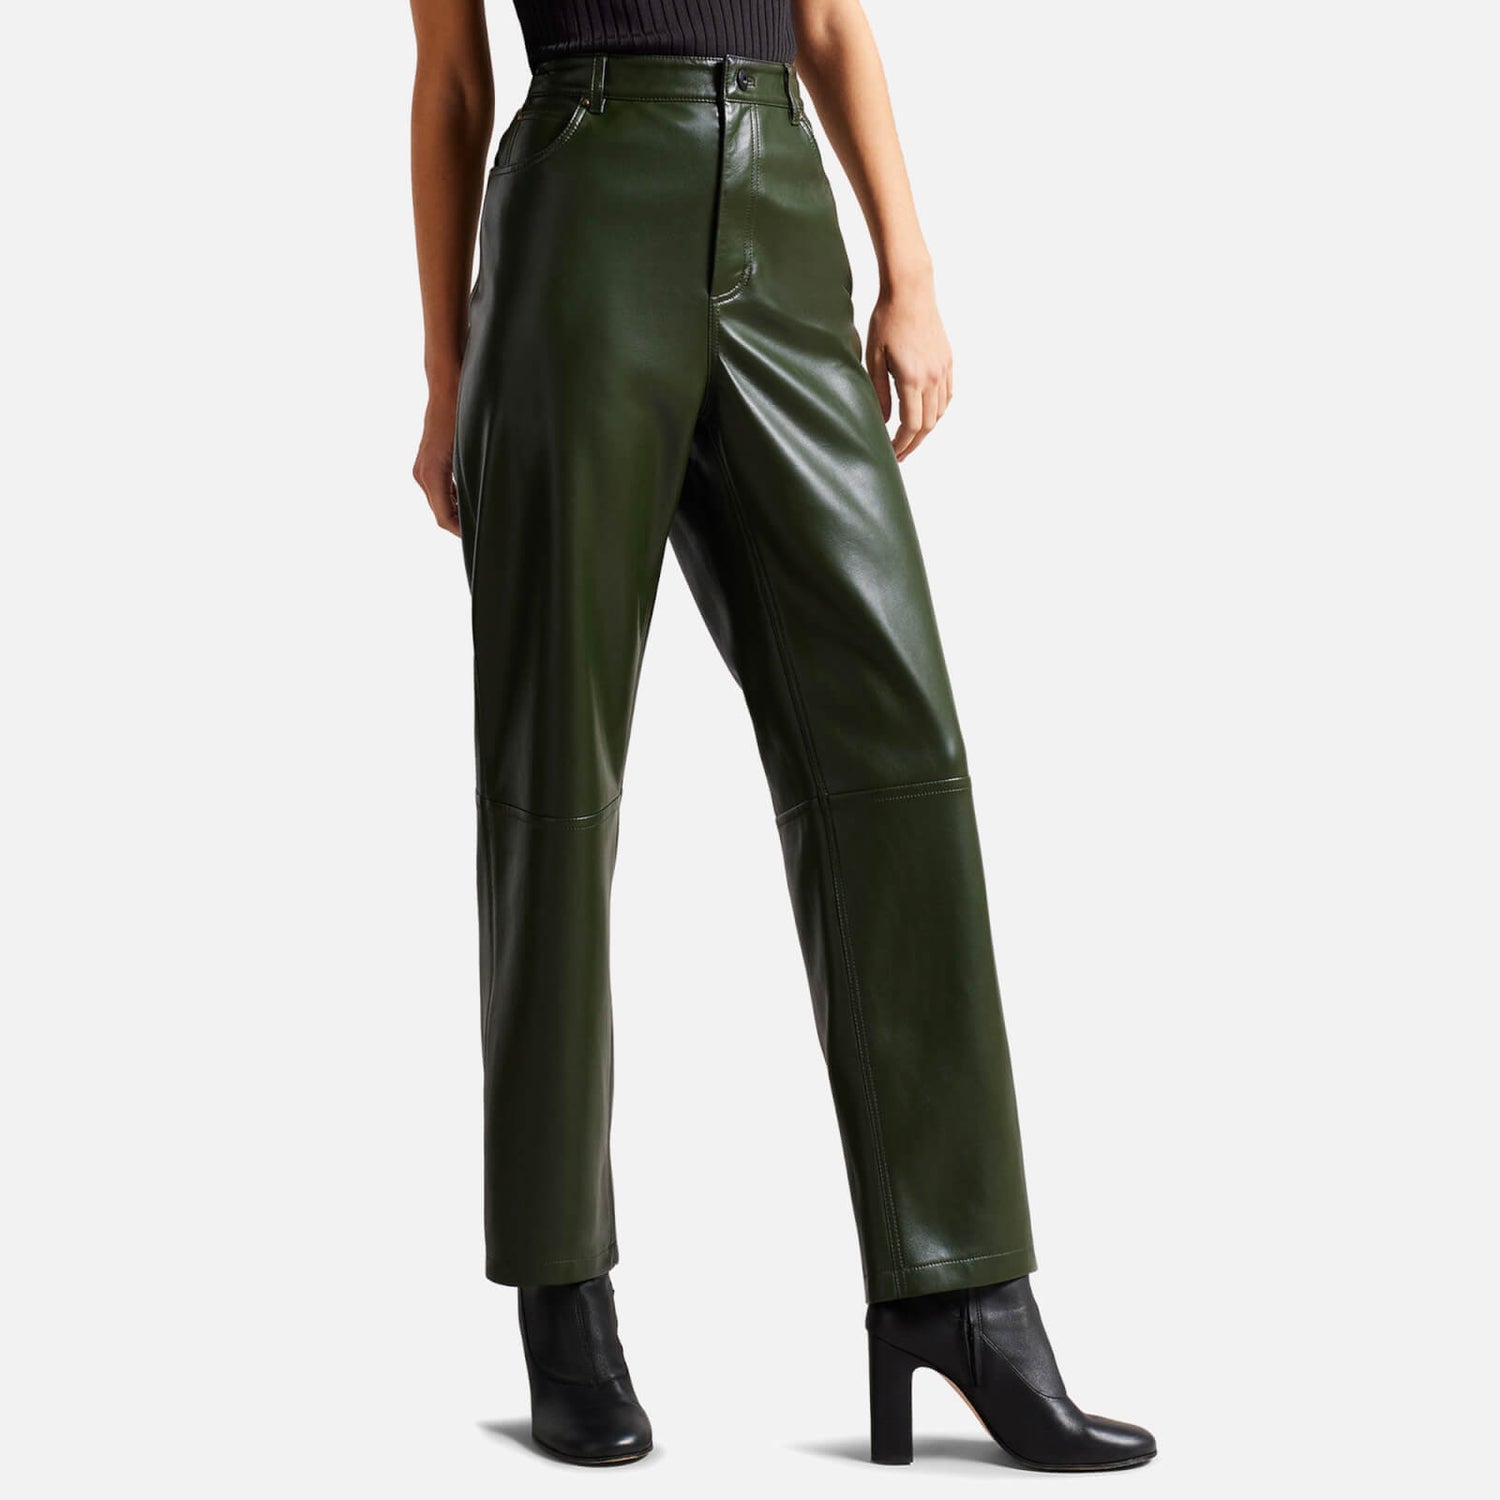 Ted Baker Plaider Faux Leather Trousers - UK 6